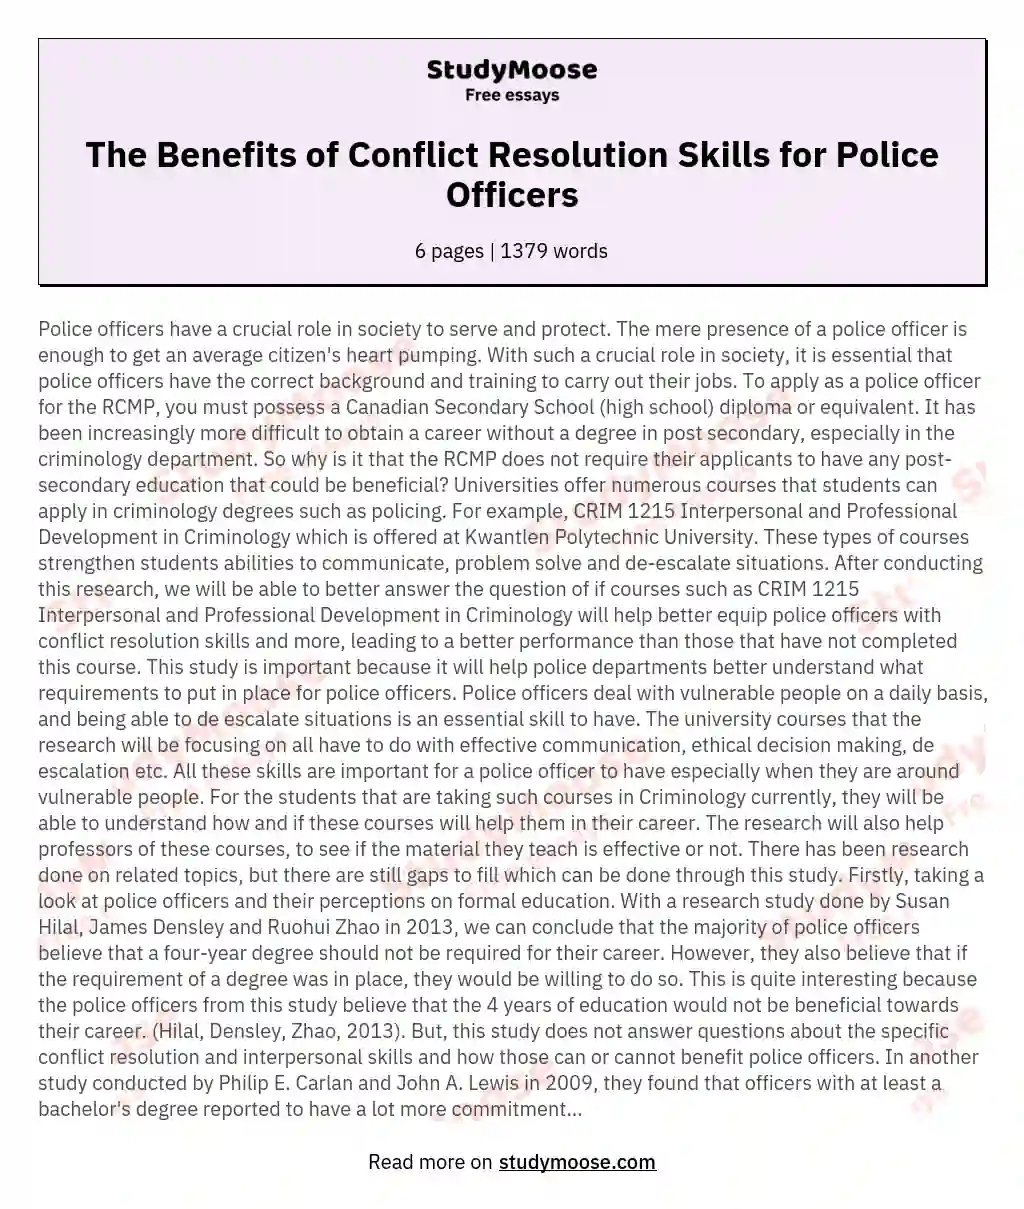 The Benefits of Conflict Resolution Skills for Police Officers